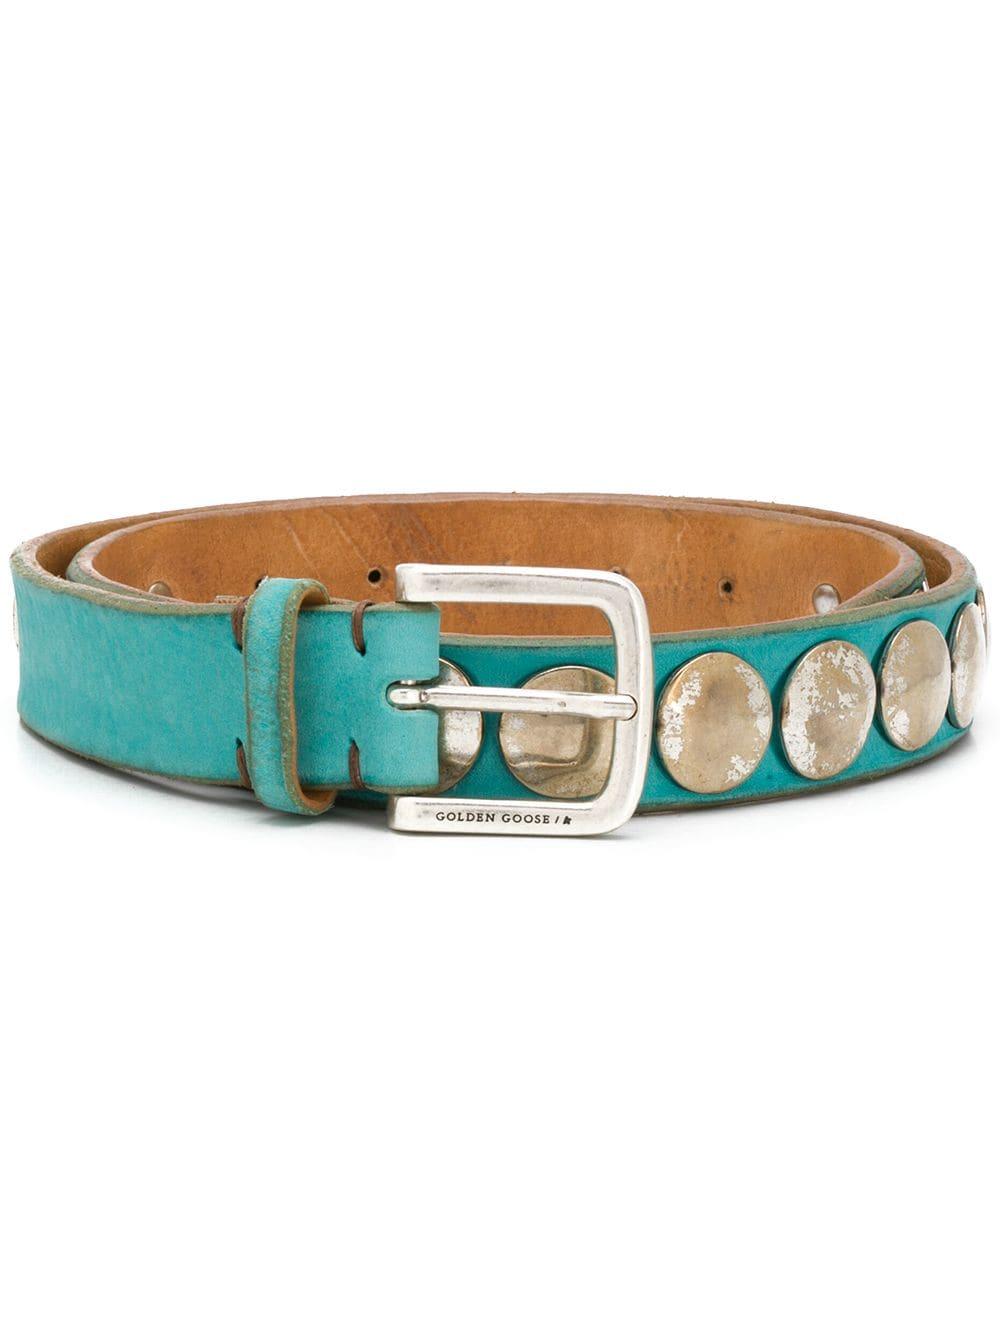 Golden Goose Deluxe Brand Studded Leather Belt in Blue - Lyst